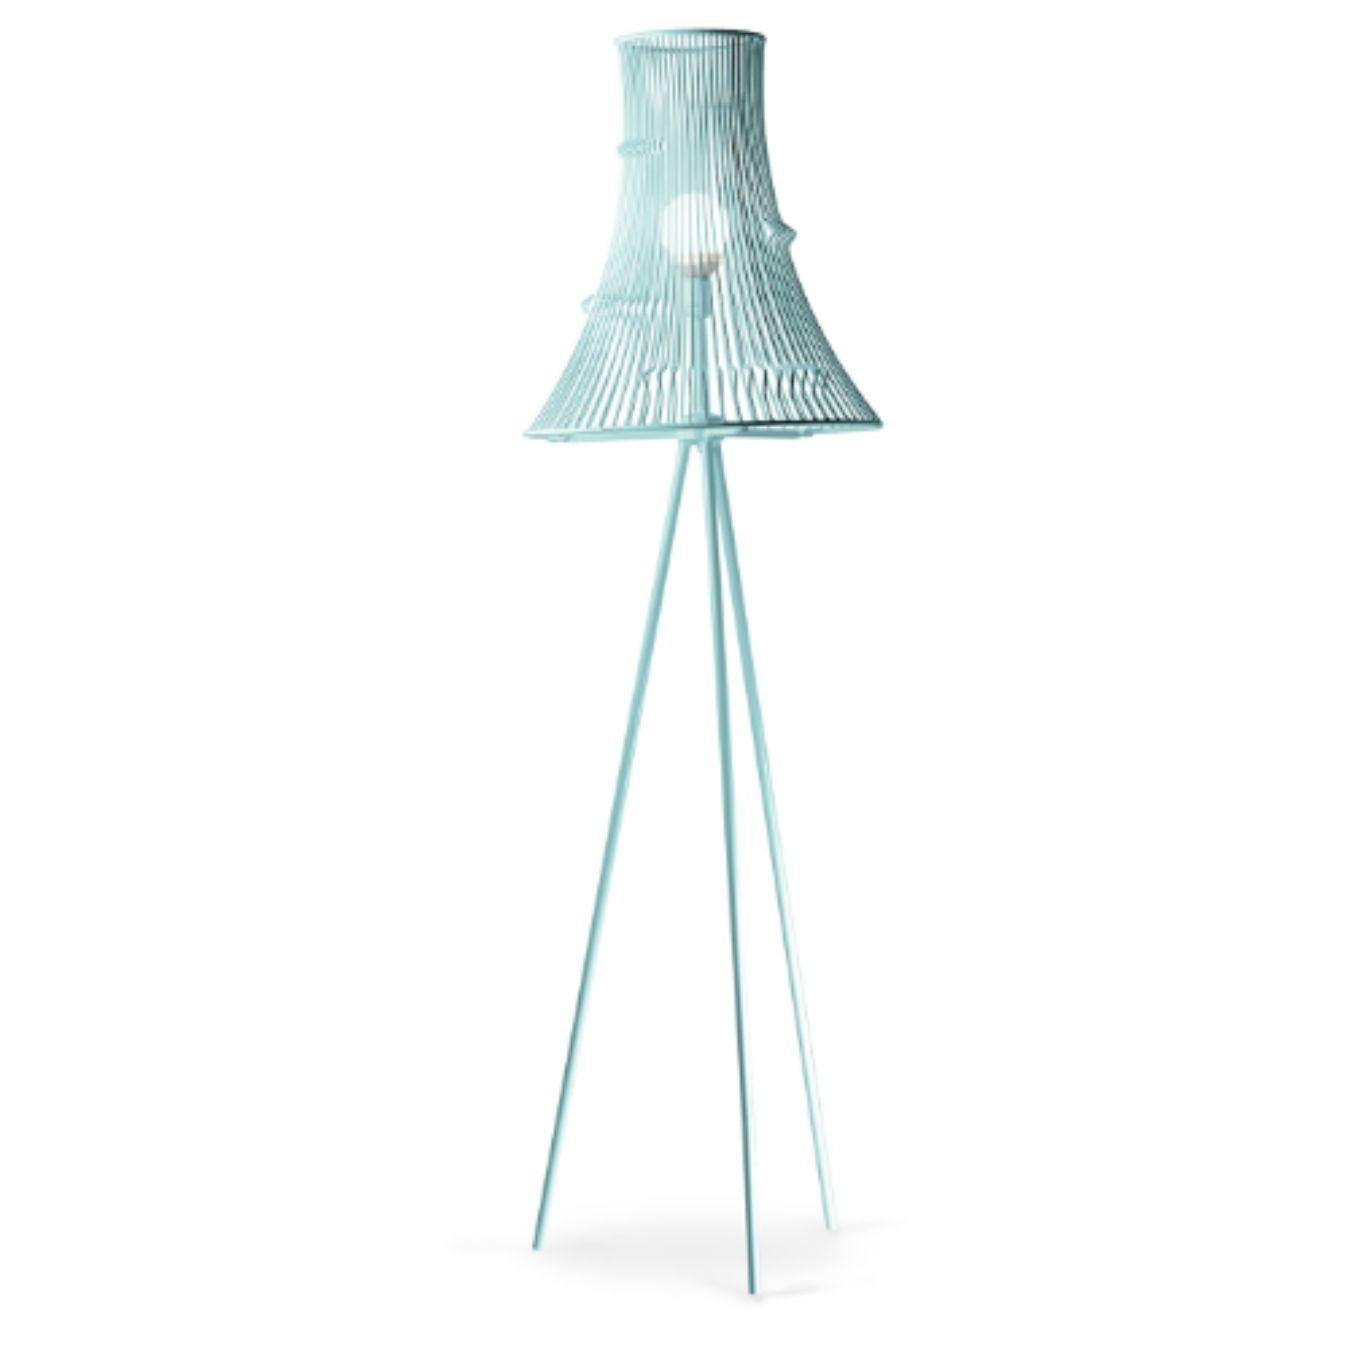 Jade extrude floor lamp by Dooq.
Dimensions: W 50 x D 50 x H 175 cm.
Materials: lacquered metal, polished or brushed metal.
Also available in different colors and materials. 

Information:
230V/50Hz
E27/1x20W LED
120V/60Hz
E26/1x15W LED
bulb not